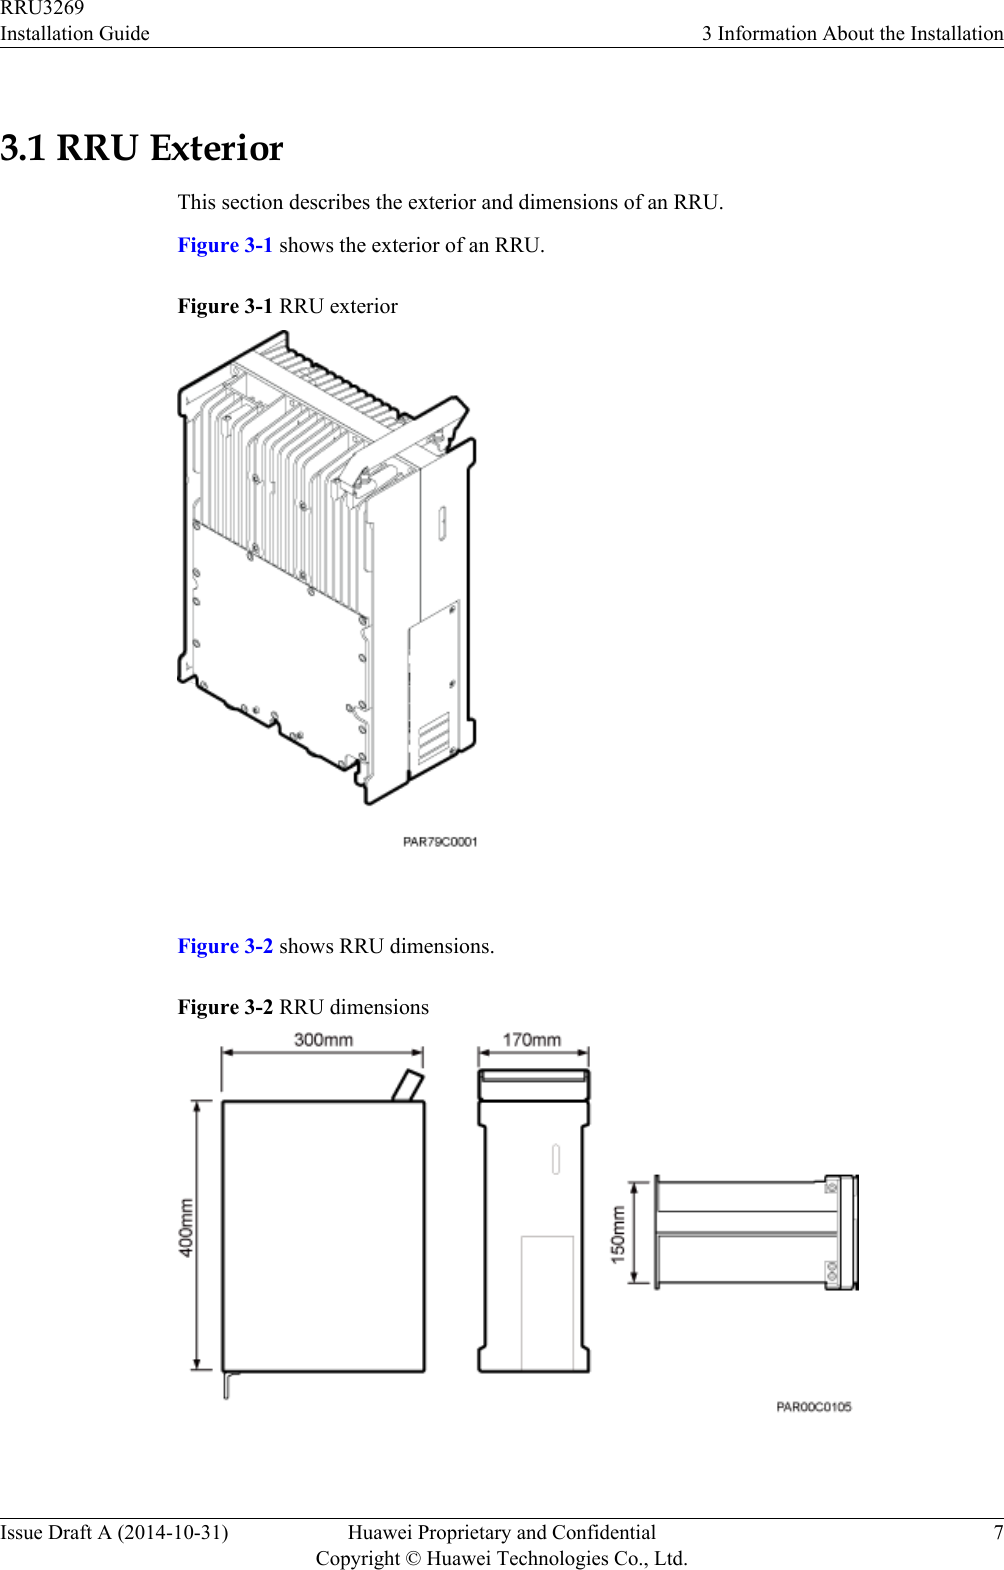 3.1 RRU ExteriorThis section describes the exterior and dimensions of an RRU.Figure 3-1 shows the exterior of an RRU.Figure 3-1 RRU exterior Figure 3-2 shows RRU dimensions.Figure 3-2 RRU dimensions RRU3269Installation Guide 3 Information About the InstallationIssue Draft A (2014-10-31) Huawei Proprietary and ConfidentialCopyright © Huawei Technologies Co., Ltd.7